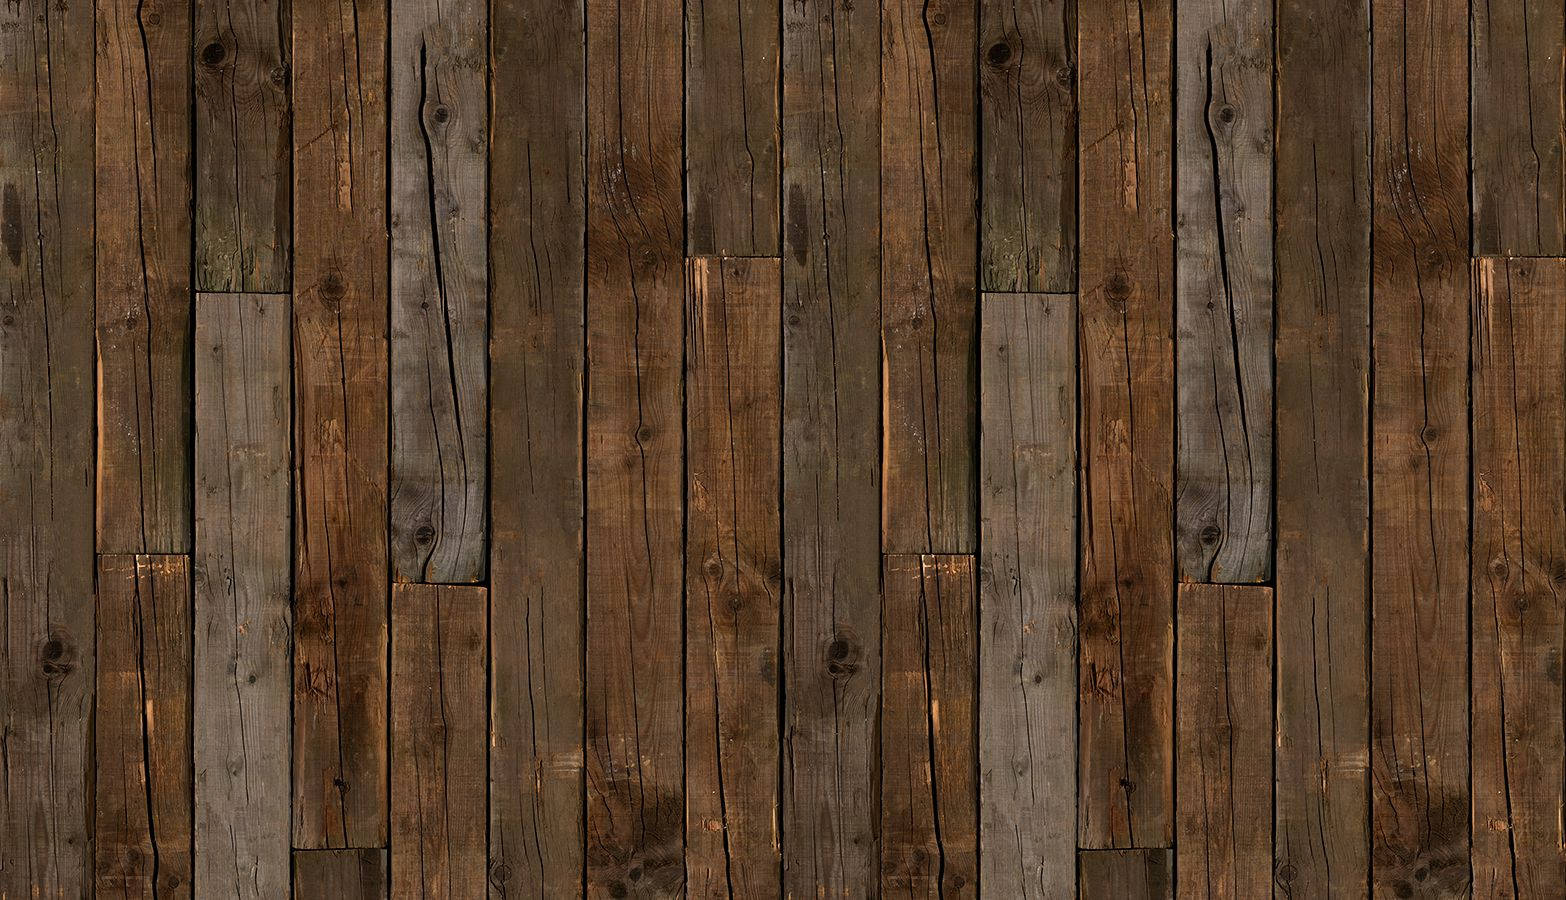 A beautiful natural wood floor perfect for any home! Wallpaper